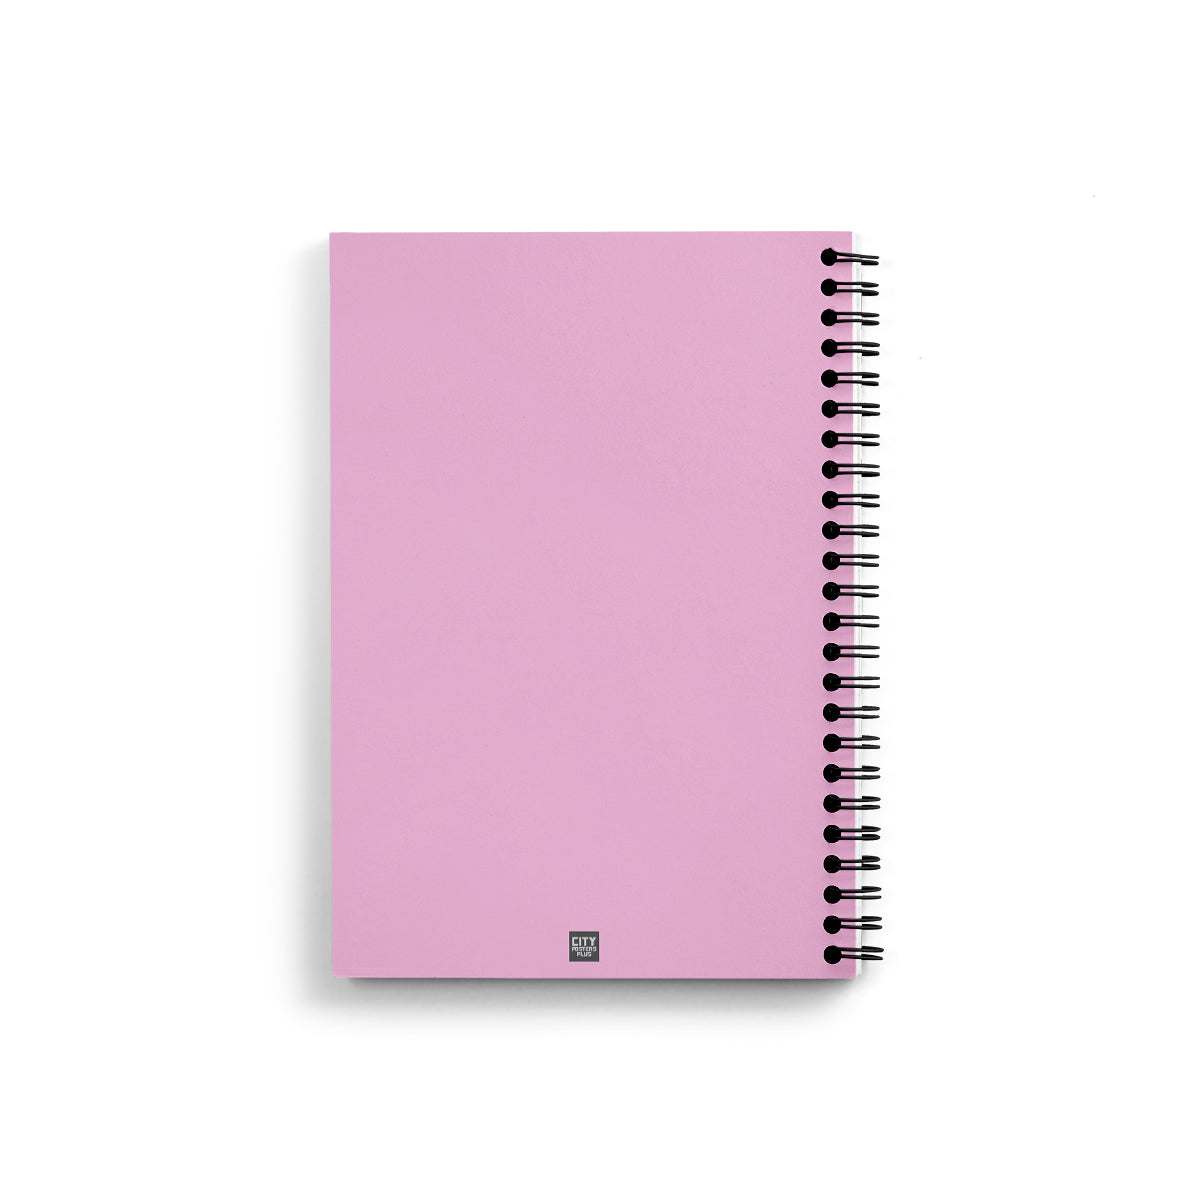 2084 Year Notebook (Light Pink, A5 Size, 100 Pages, Ruled)